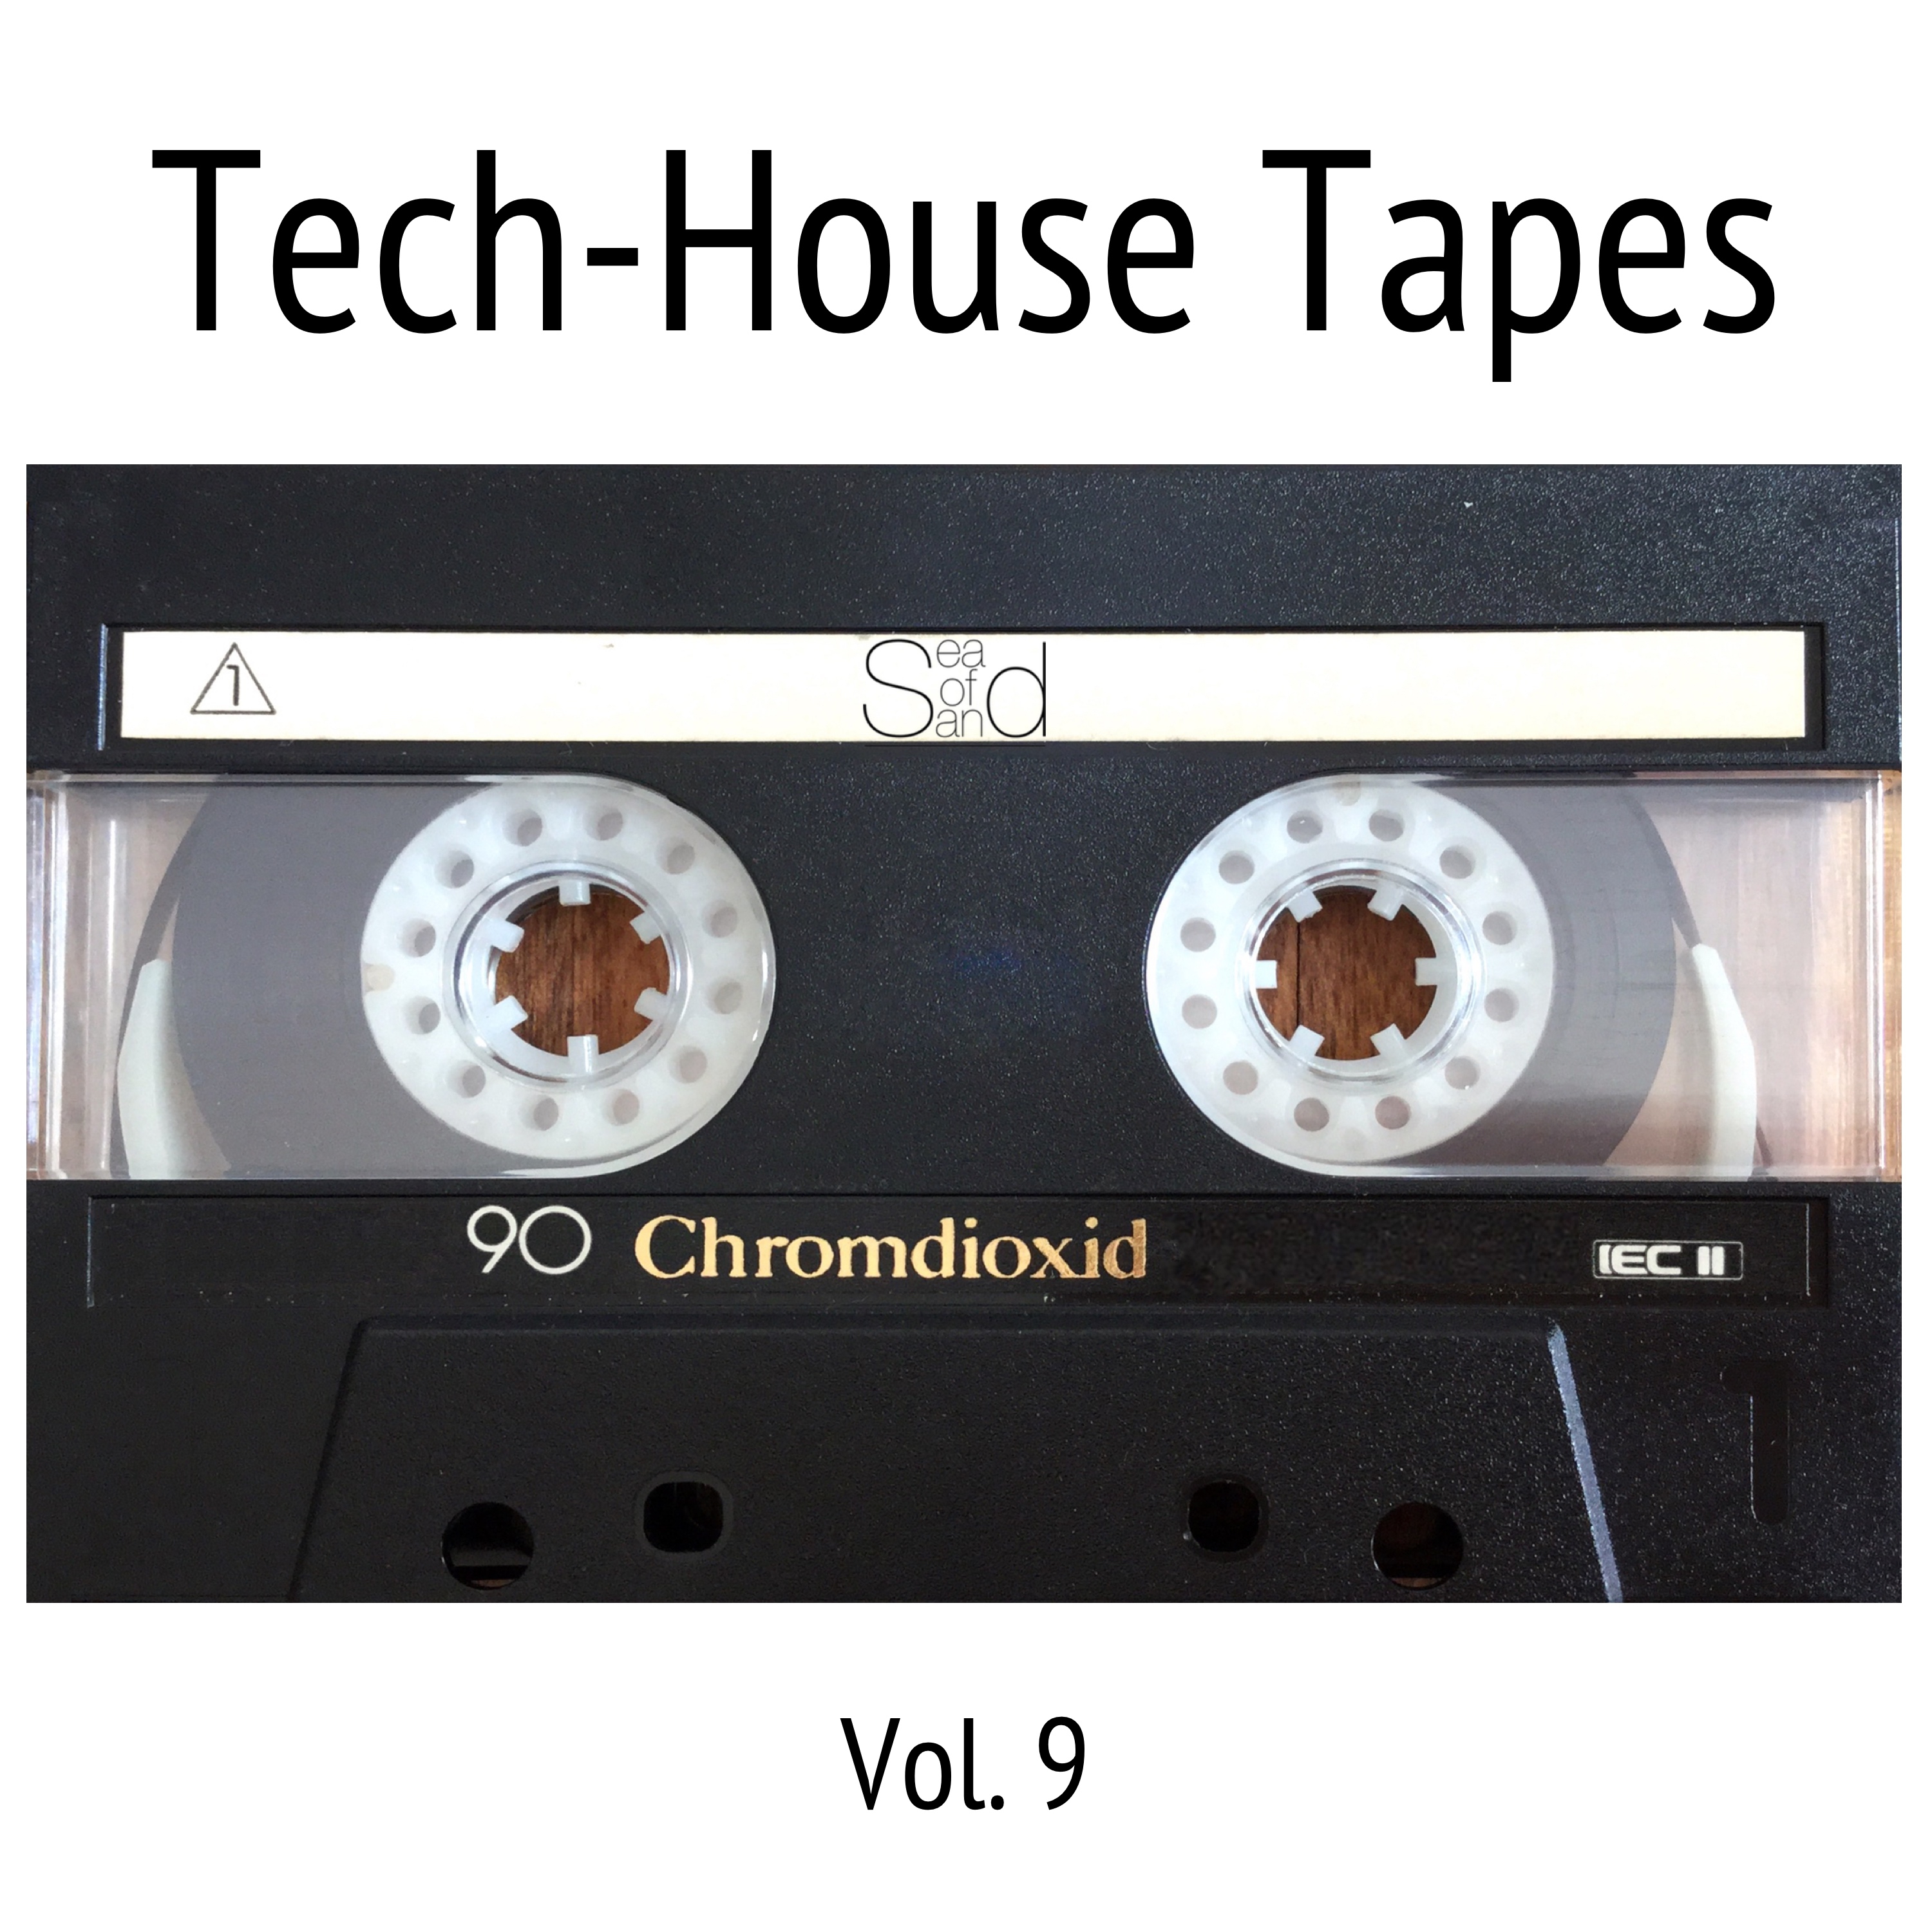 Tech-House Tapes, Vol. 9